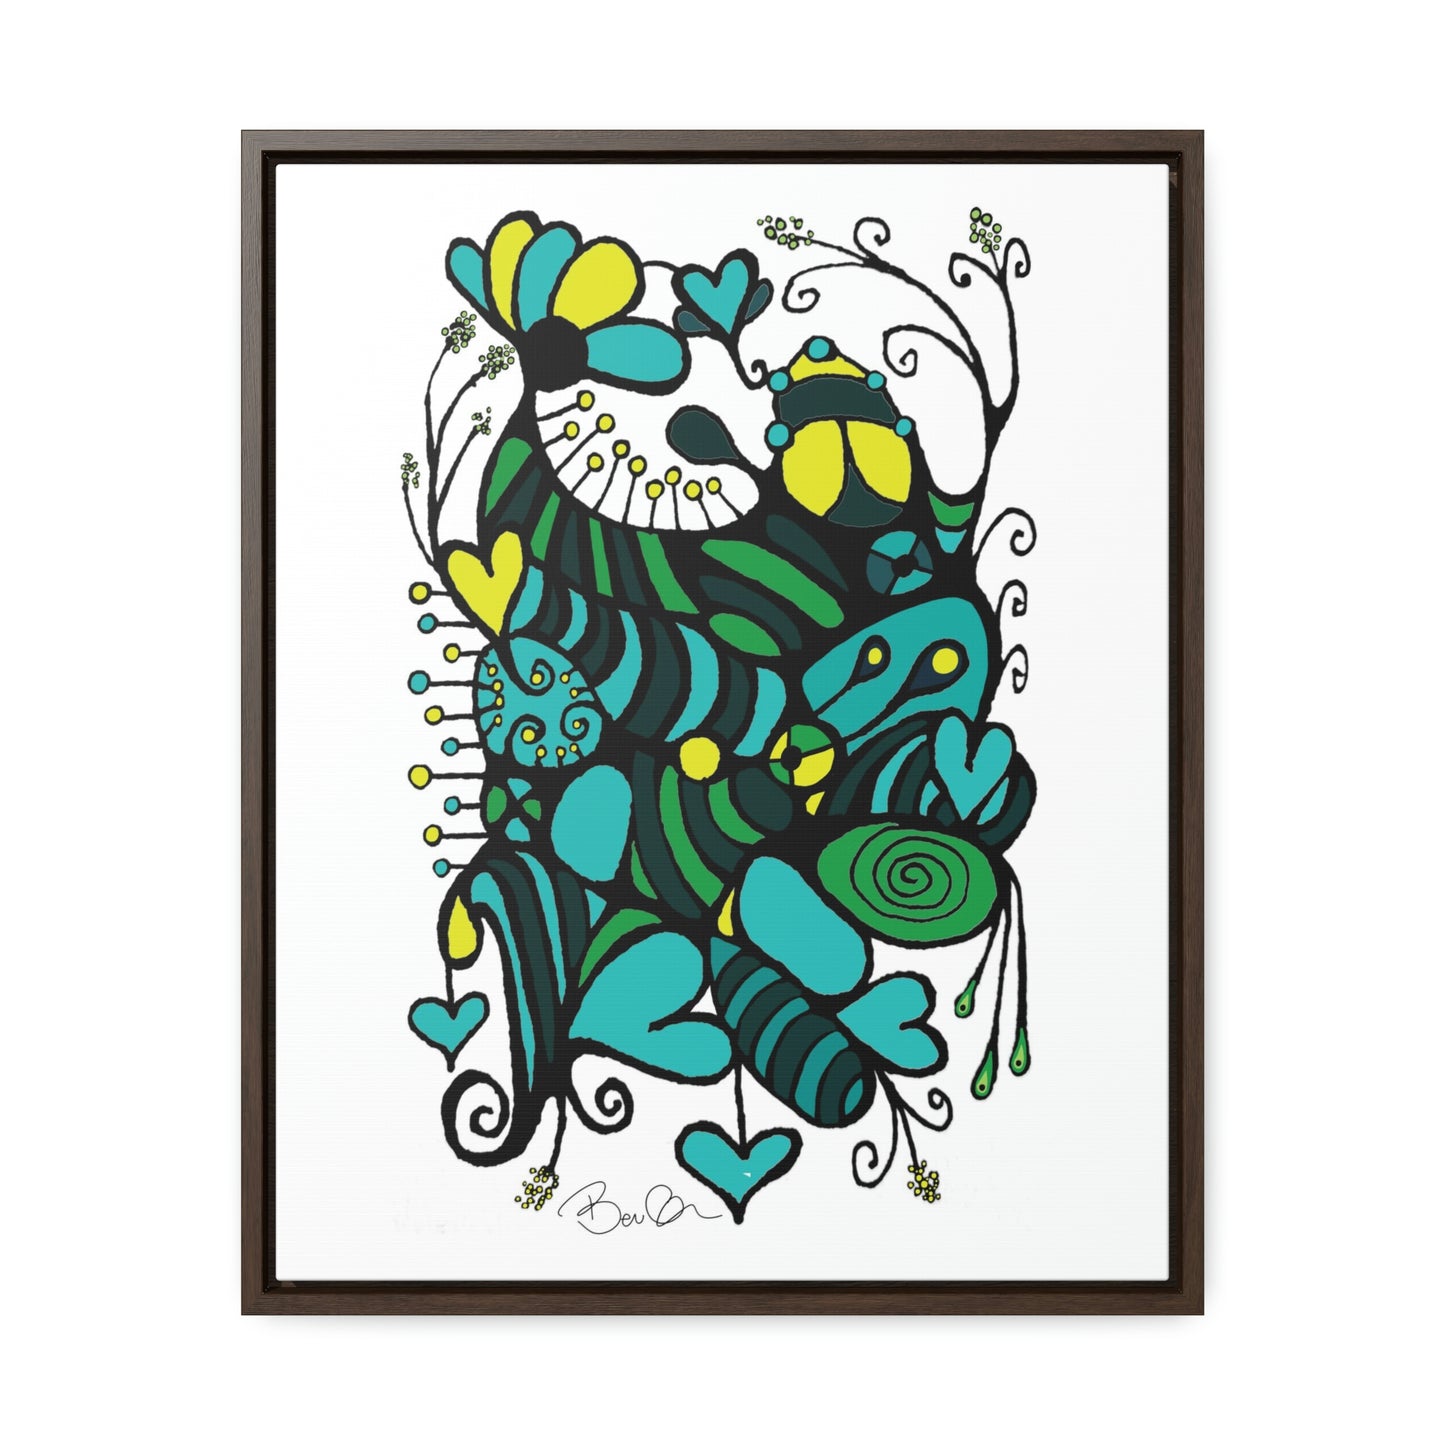 Gallery Canvas Wraps - "Garden of Serenity" - Framed Doodle Painting with Hidden Heart